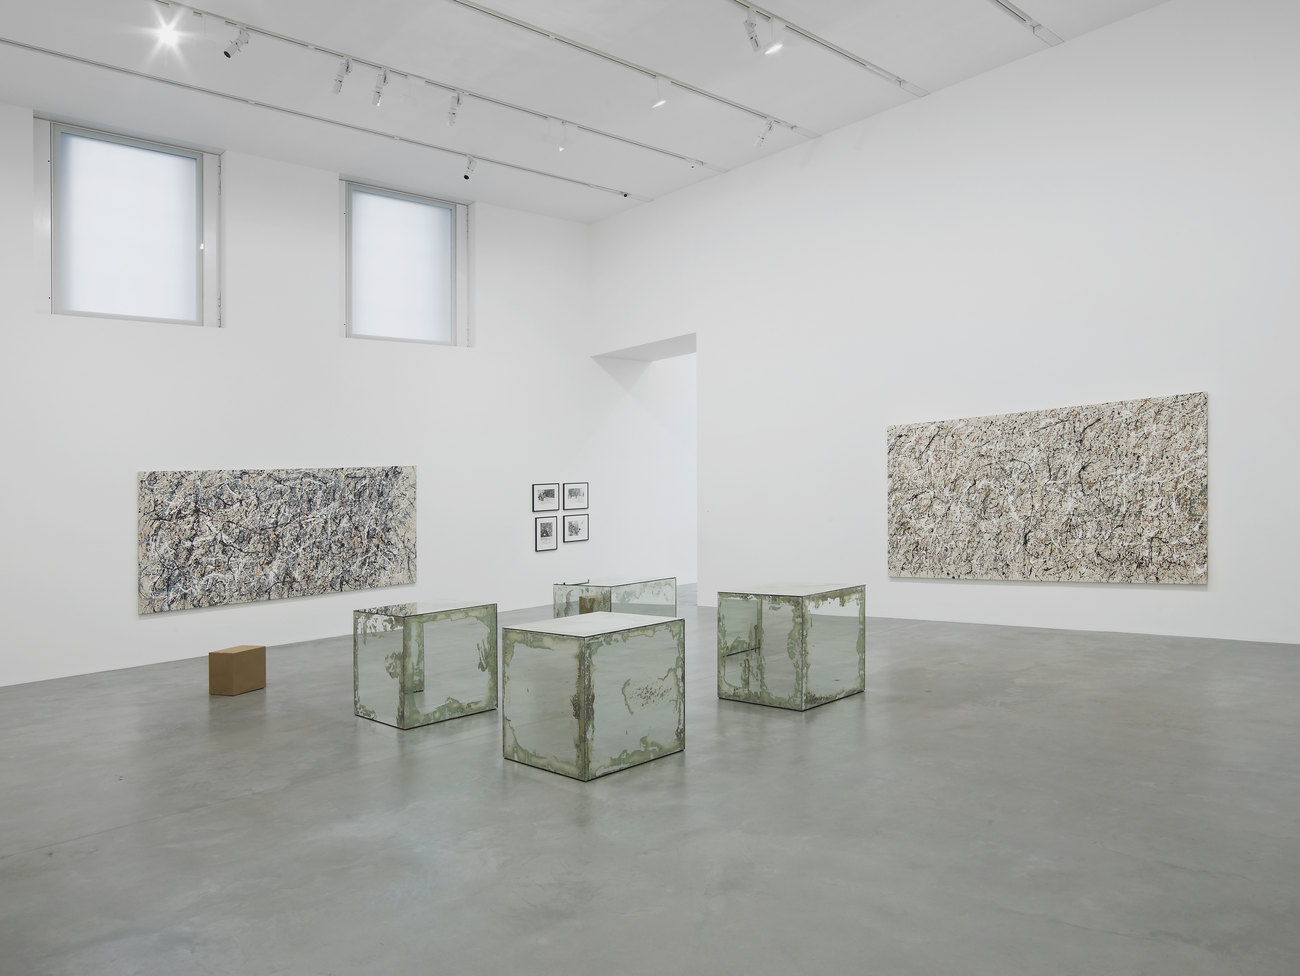 4 mirrored cubes sit in the centre of a room equidistant apart, on the two walls behind are two large paintings